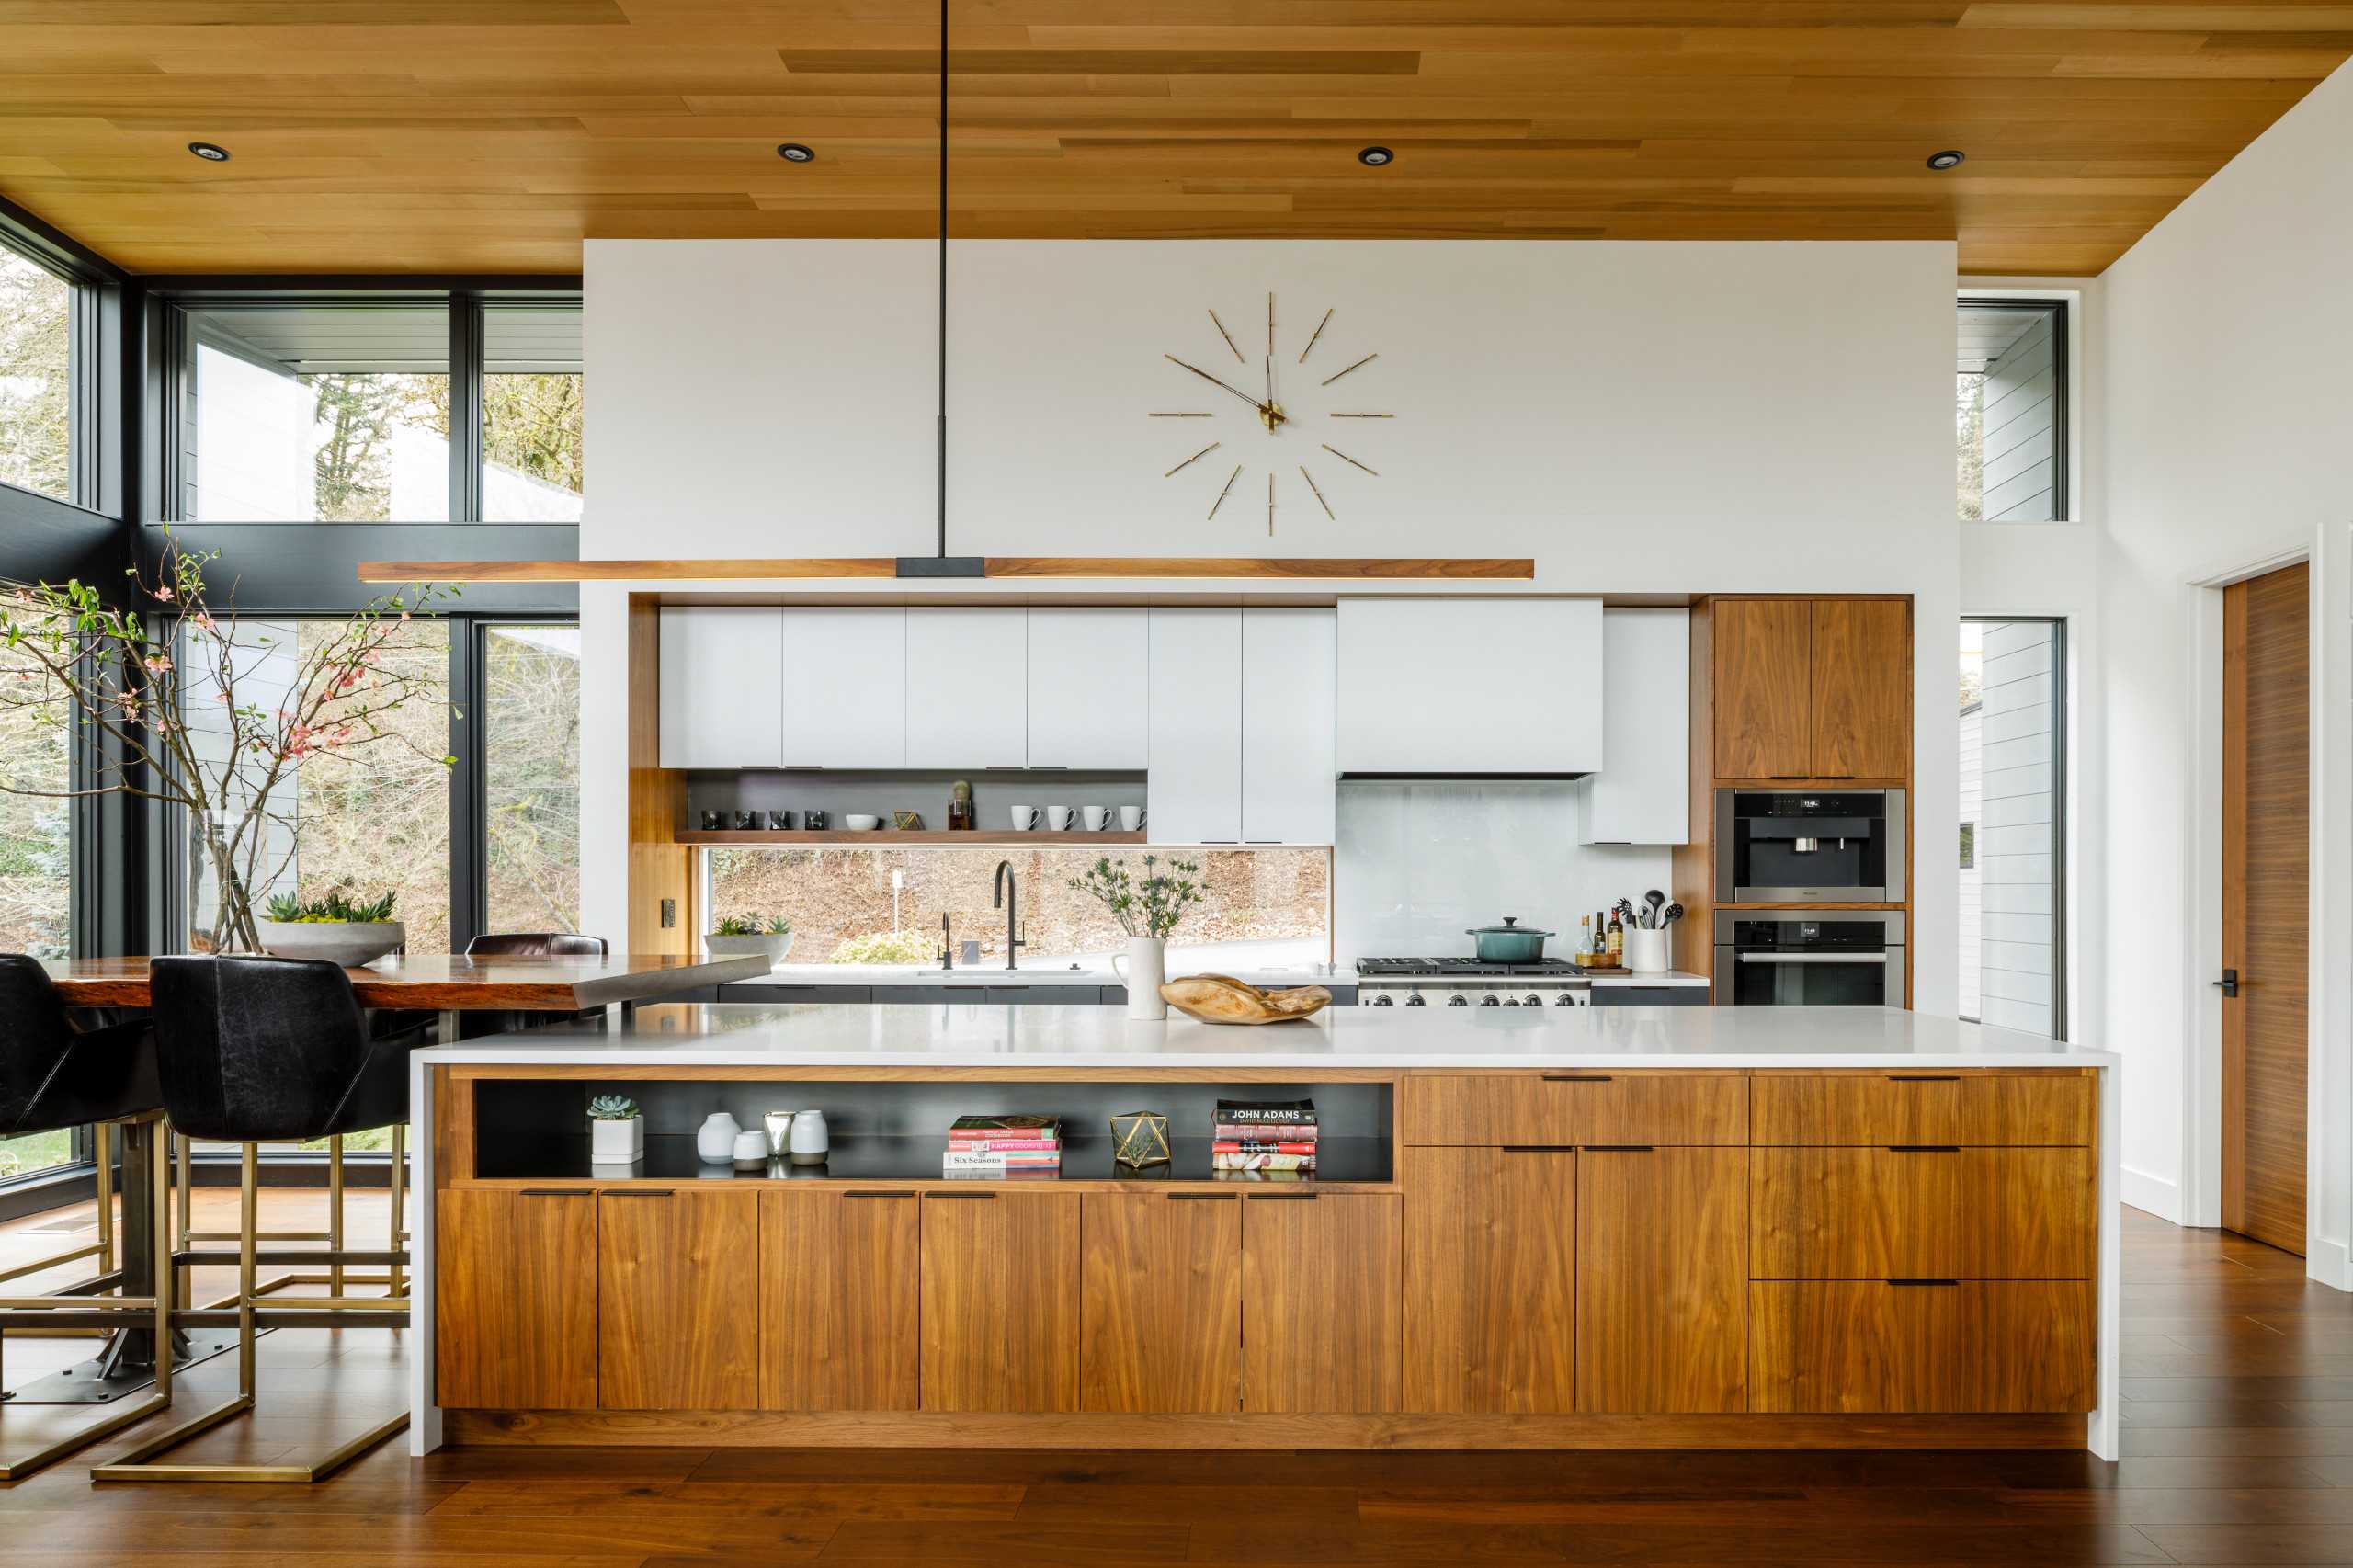 Mid-century modern kitchen with wooden cabinets, tiled backsplash, and pendant lighting